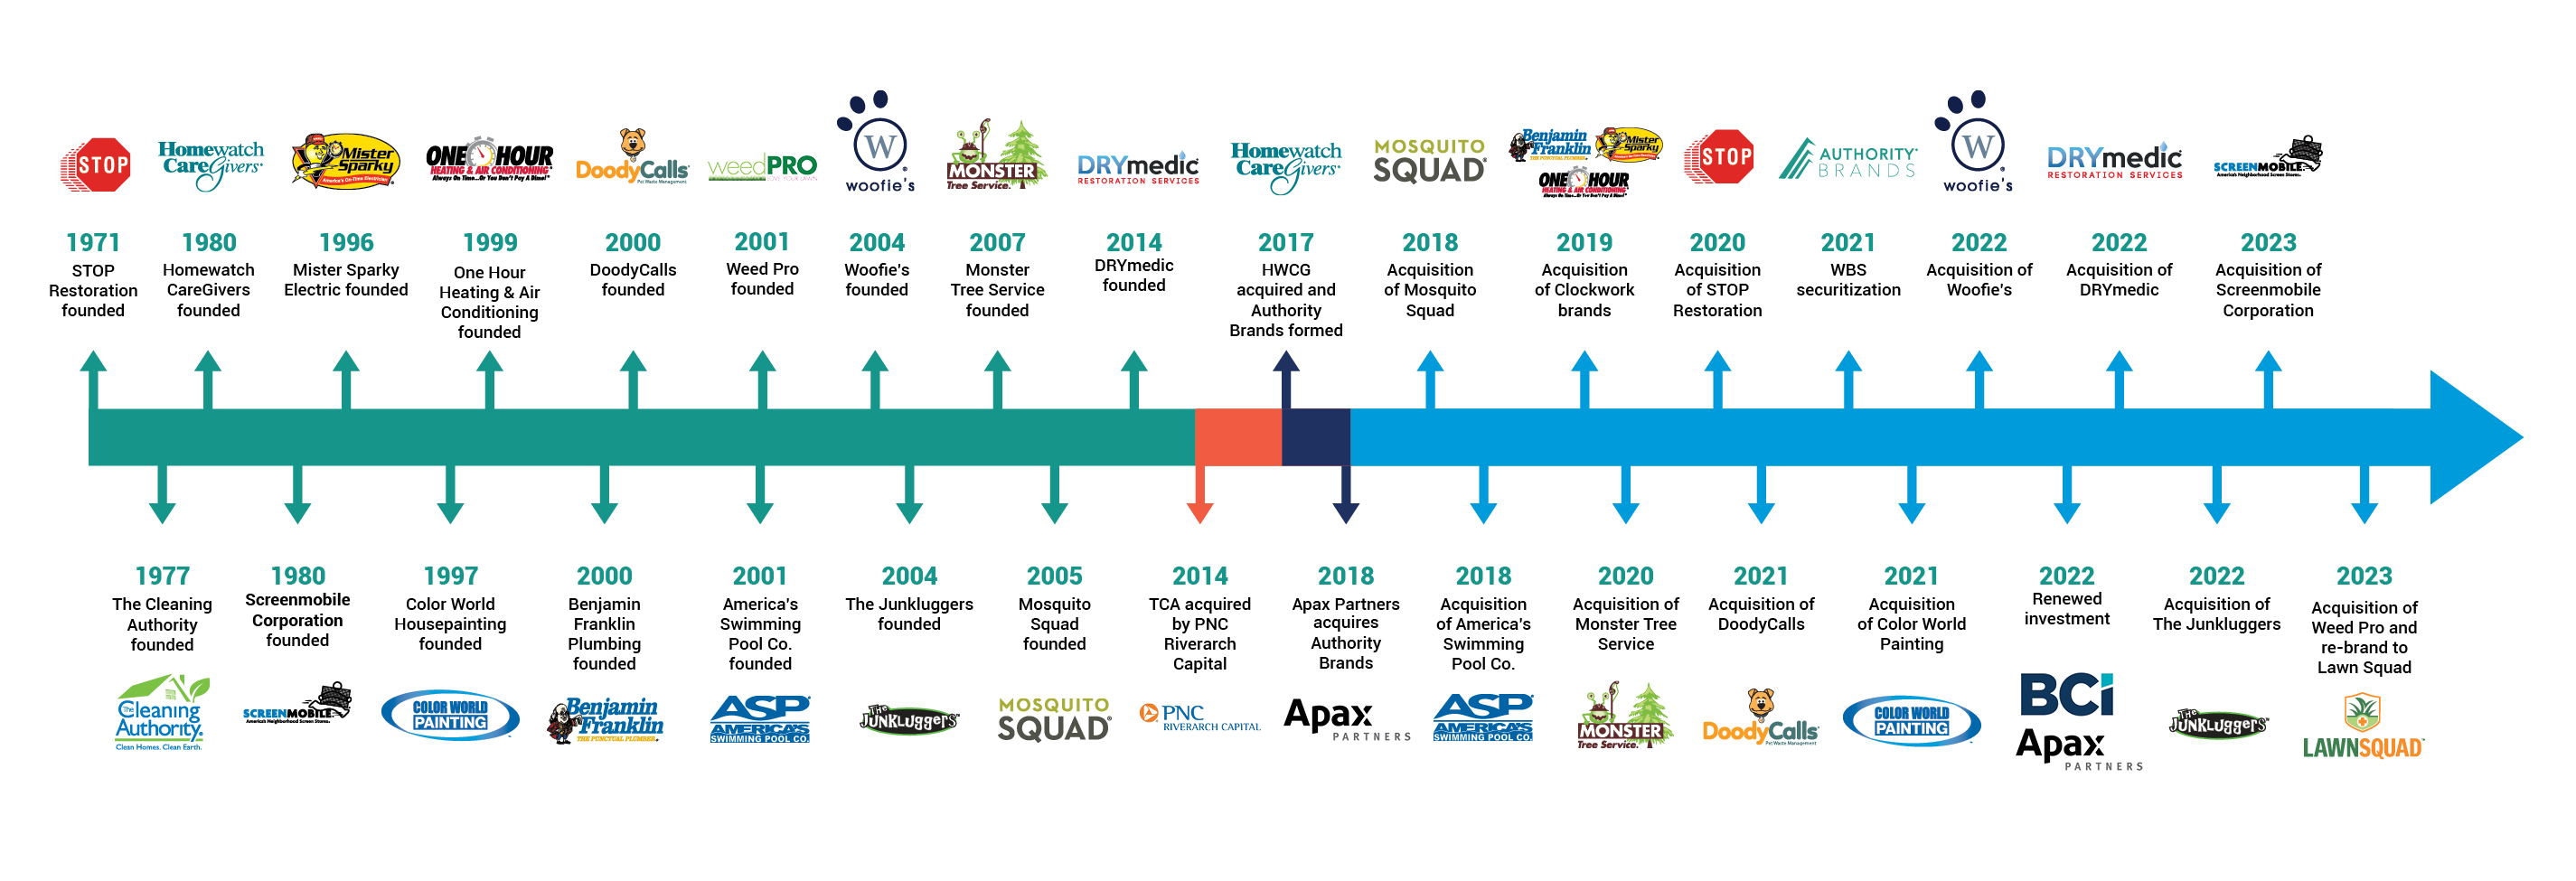 Authority Brands brand acquisition timeline from 1971 to 2022